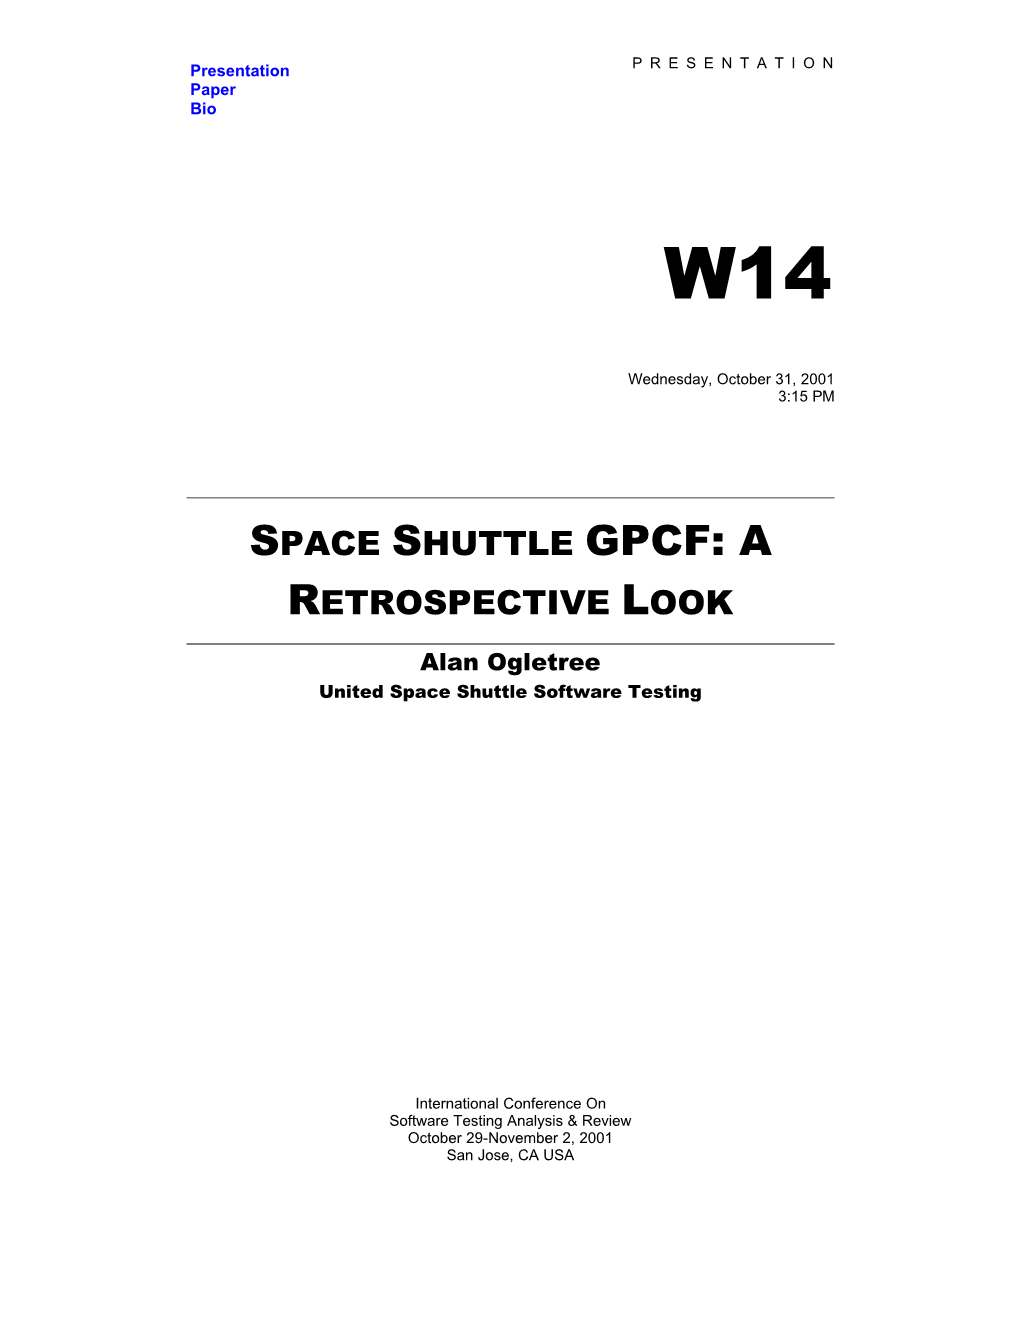 Space Shuttle Gpcf: a Retrospective Look